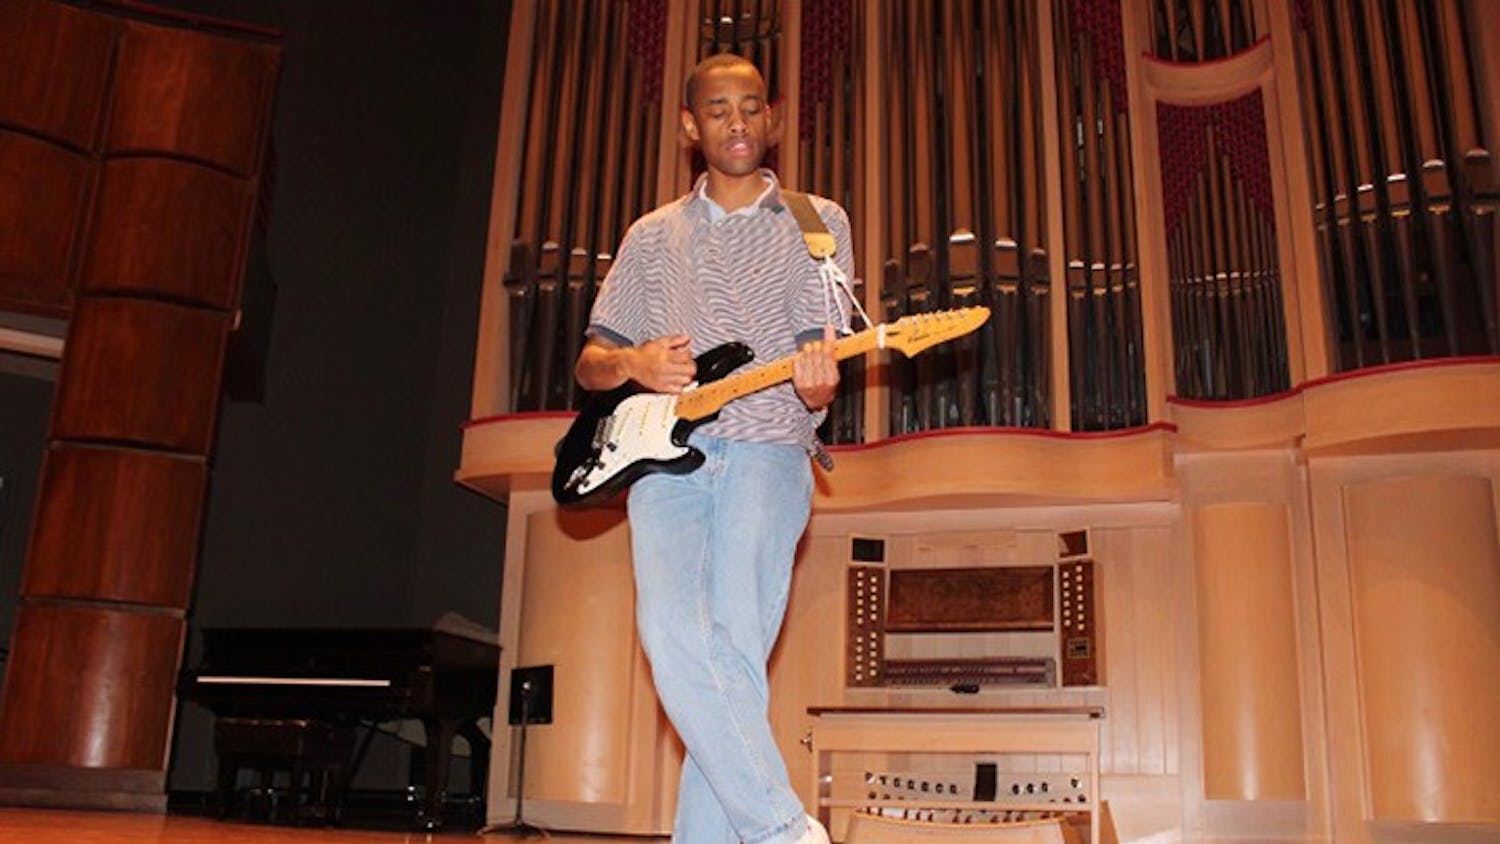 Sanchez Goodjoin performs at the Koger Center for the Arts. Goodjoin is known for his exciting stage presence.&nbsp;